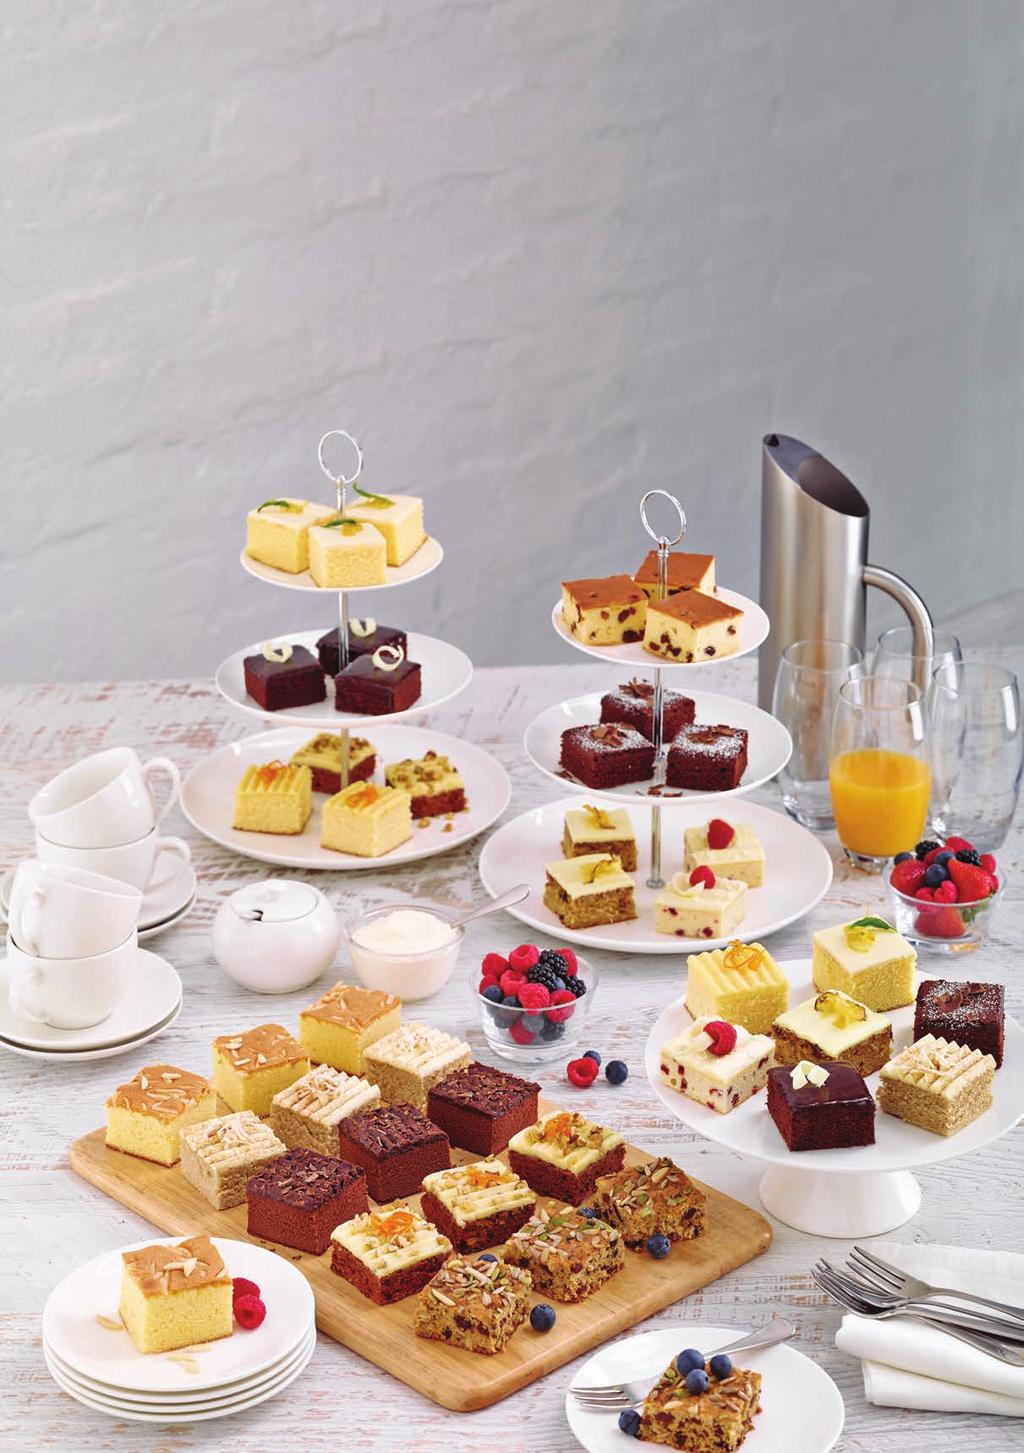 Classic Tray Cakes We make our famous Tray Cakes from scratch to traditional recipes, using generous amounts of the very best ingredients - from Australia wherever possible.